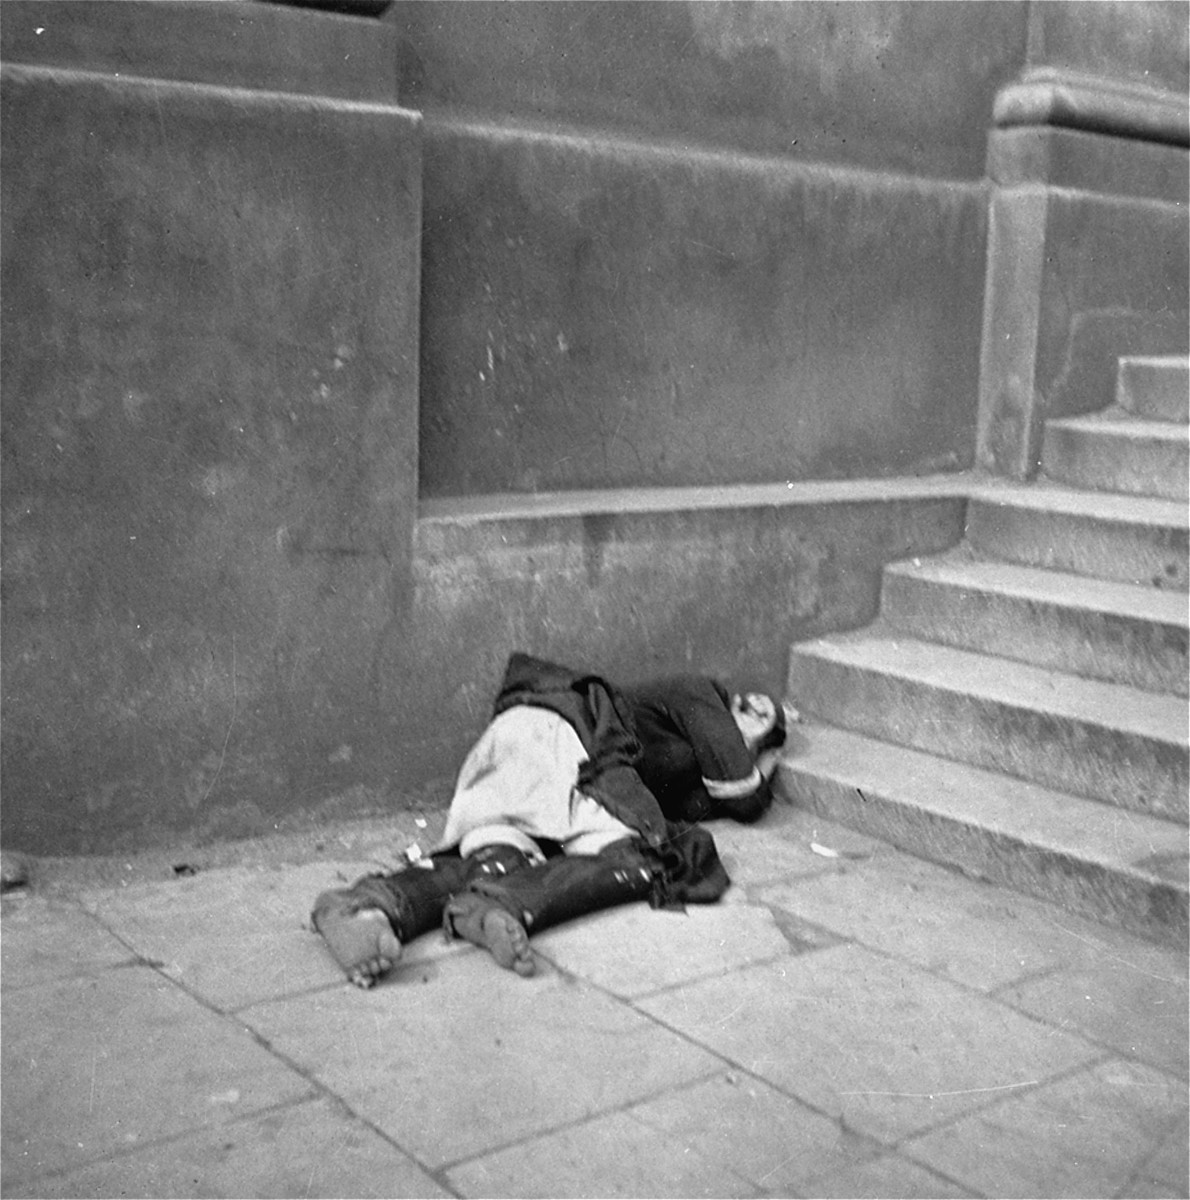 The Body Of A Dead Woman On The Street In The Warsaw Ghetto